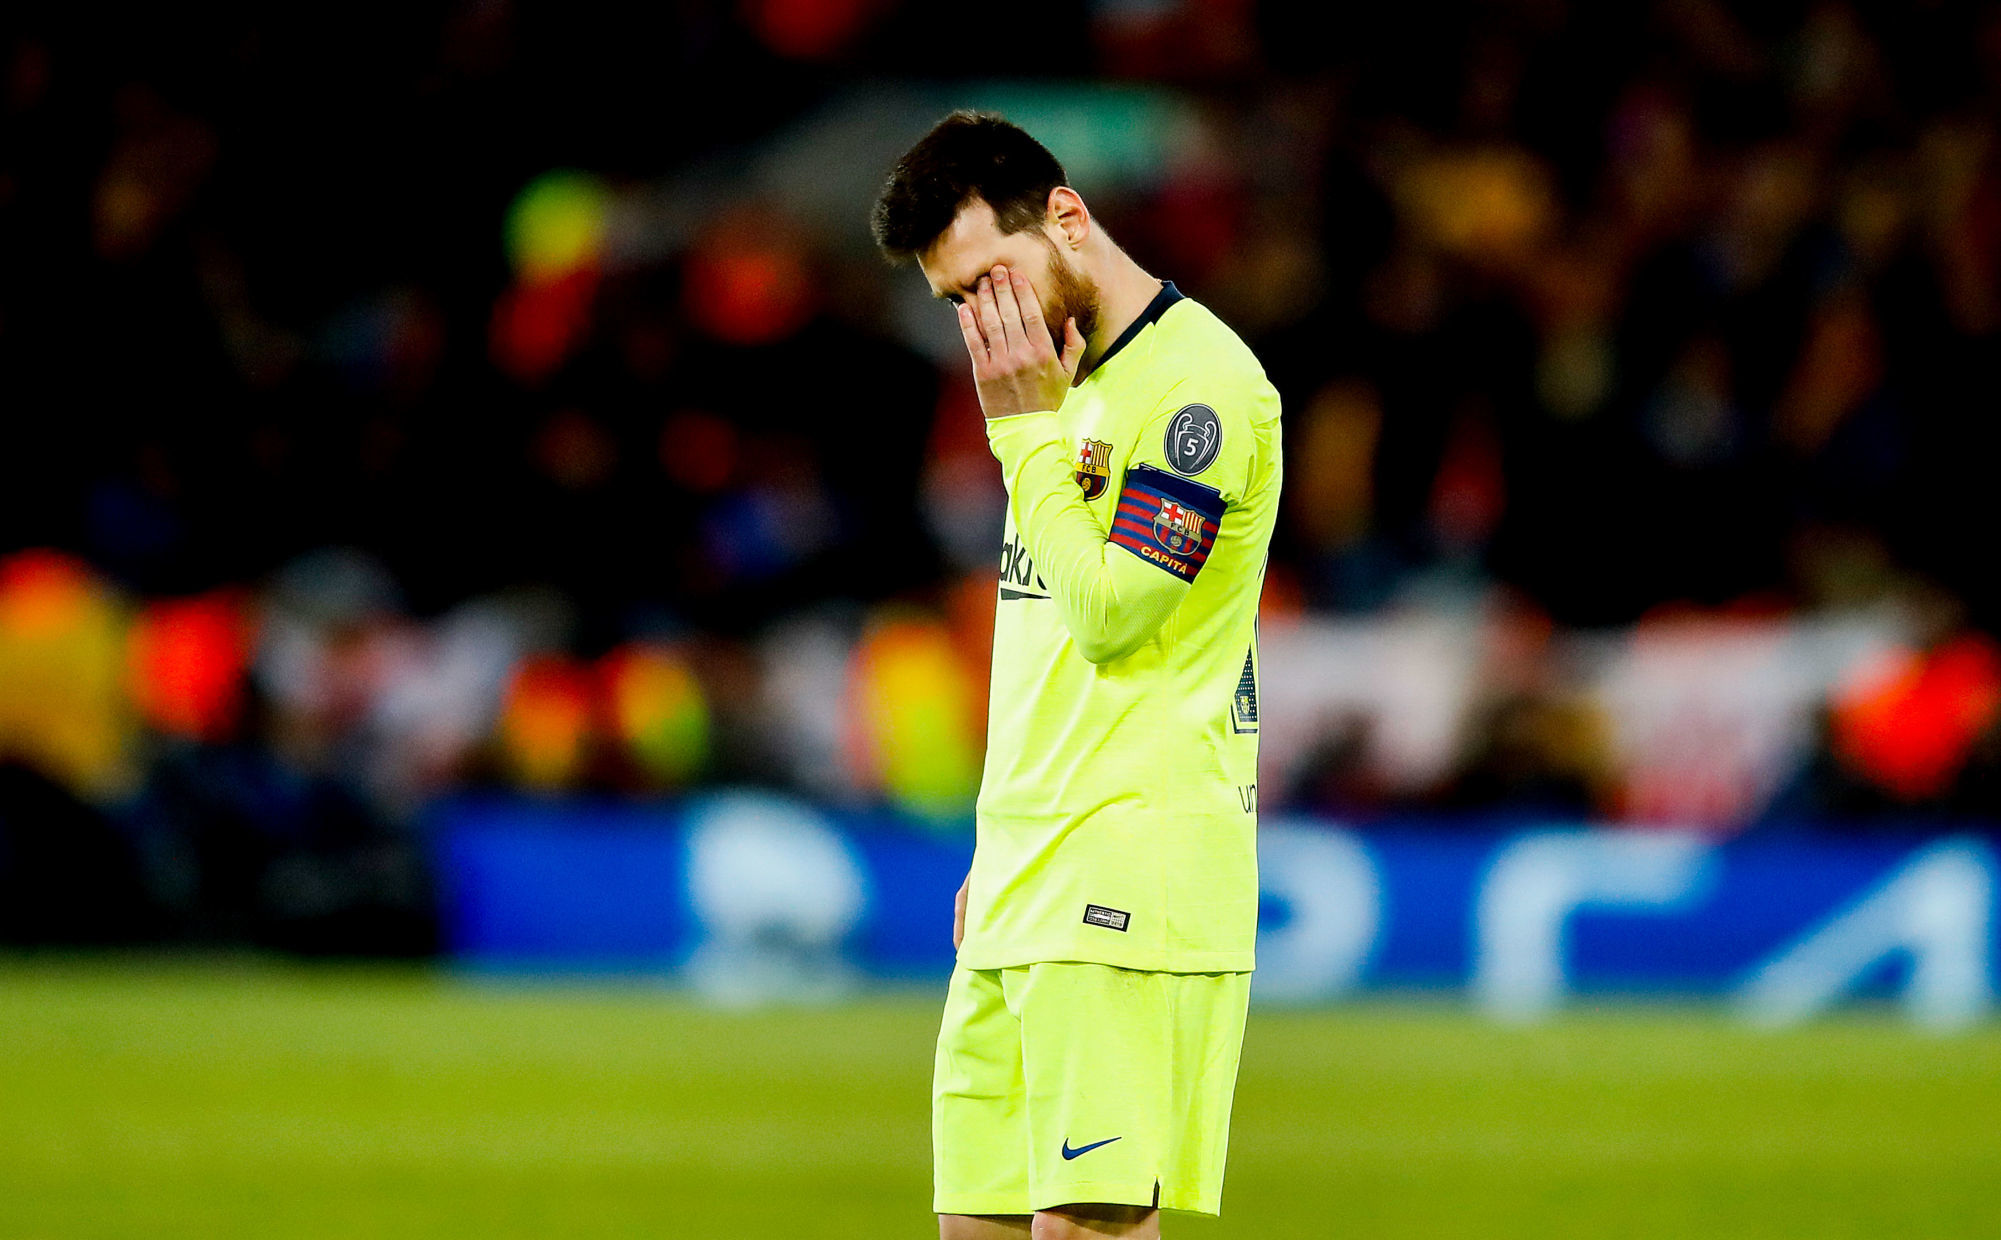 Barcelona's Lionel Messi appears dejected UEFA Champions League Semi Final, second leg match at Anfield, Liverpool on May 7th, 2019. Photo : PA Images / Icon Sport